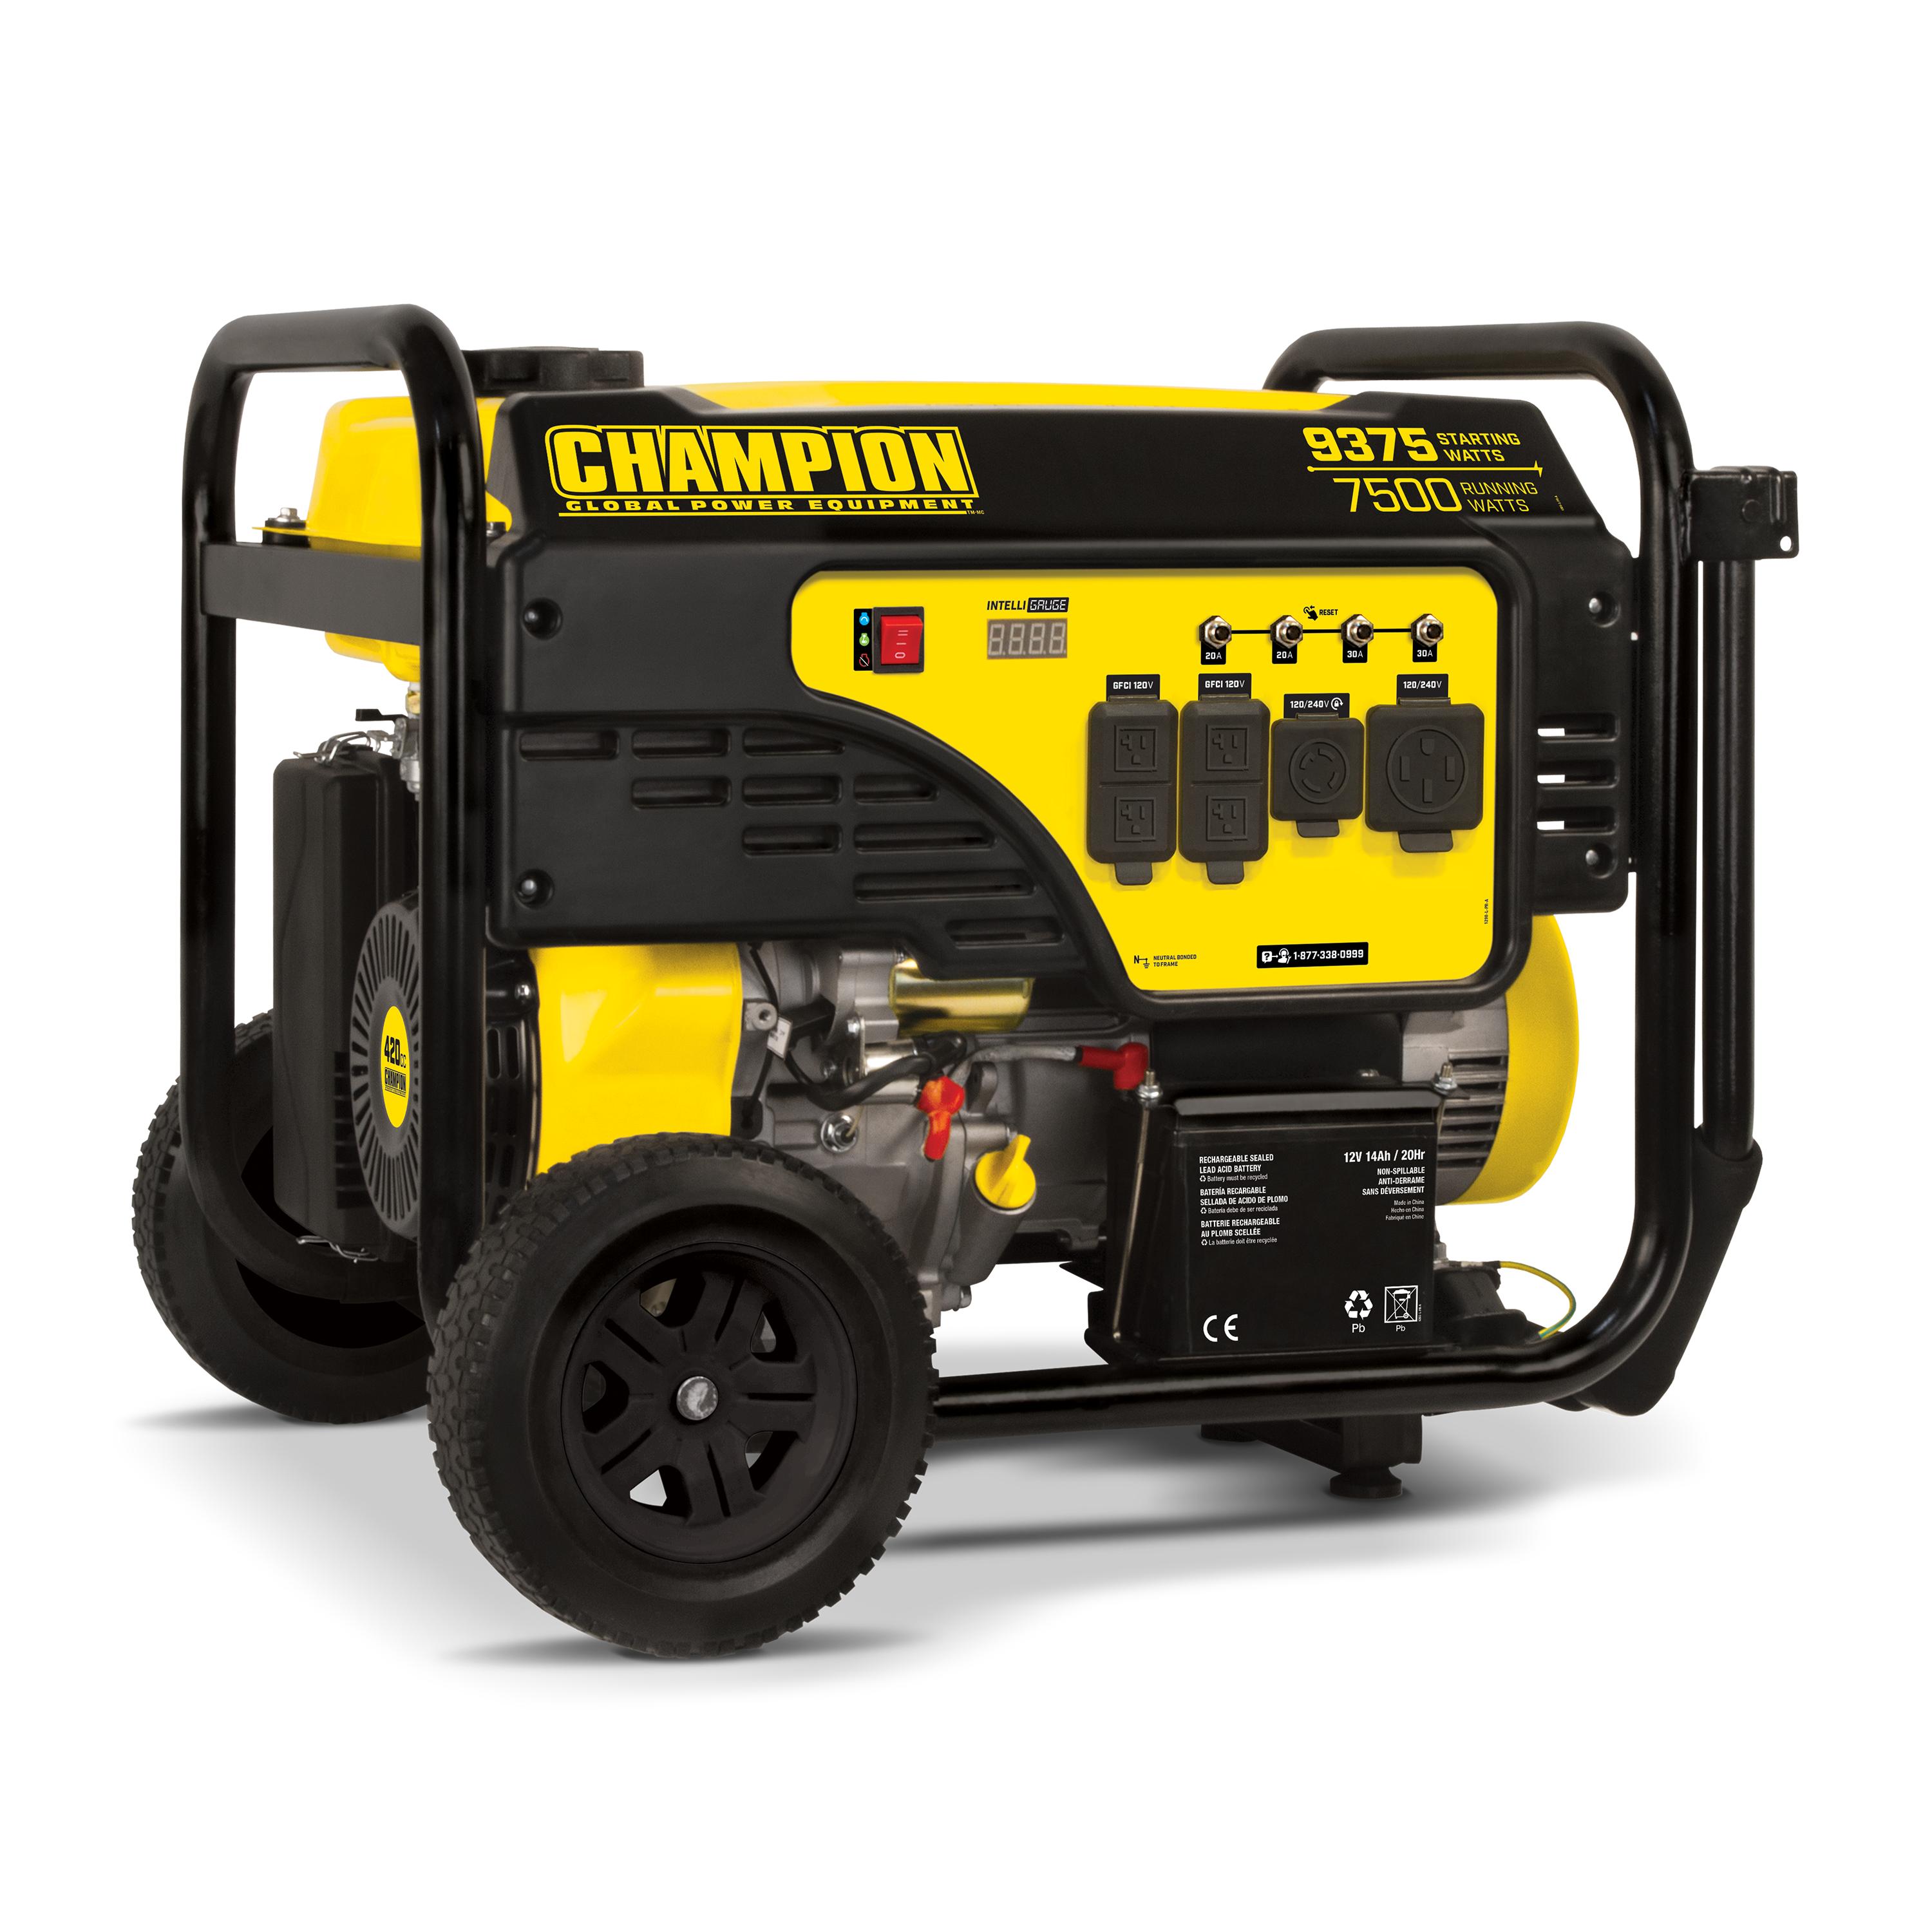 Champion Power Equipment 9375/7500 Watts Portable Generator with Electric Start - image 1 of 10